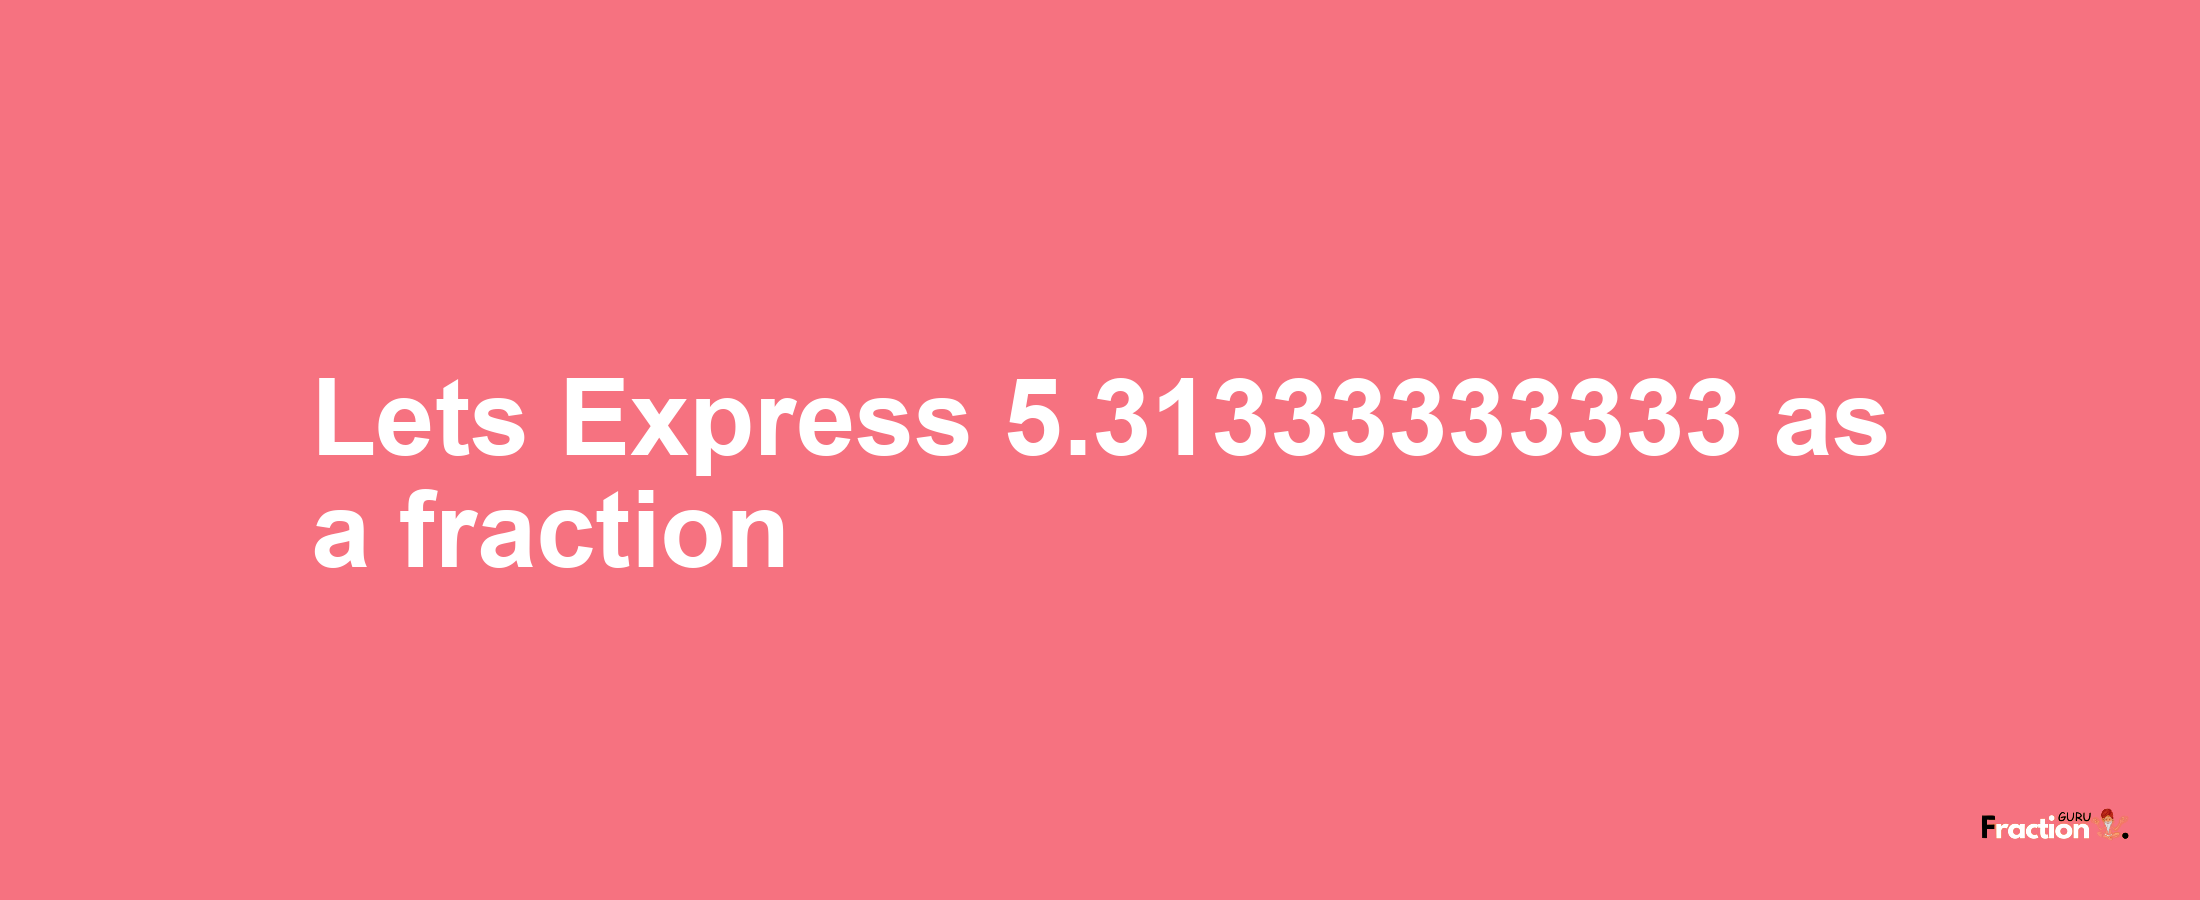 Lets Express 5.31333333333 as afraction